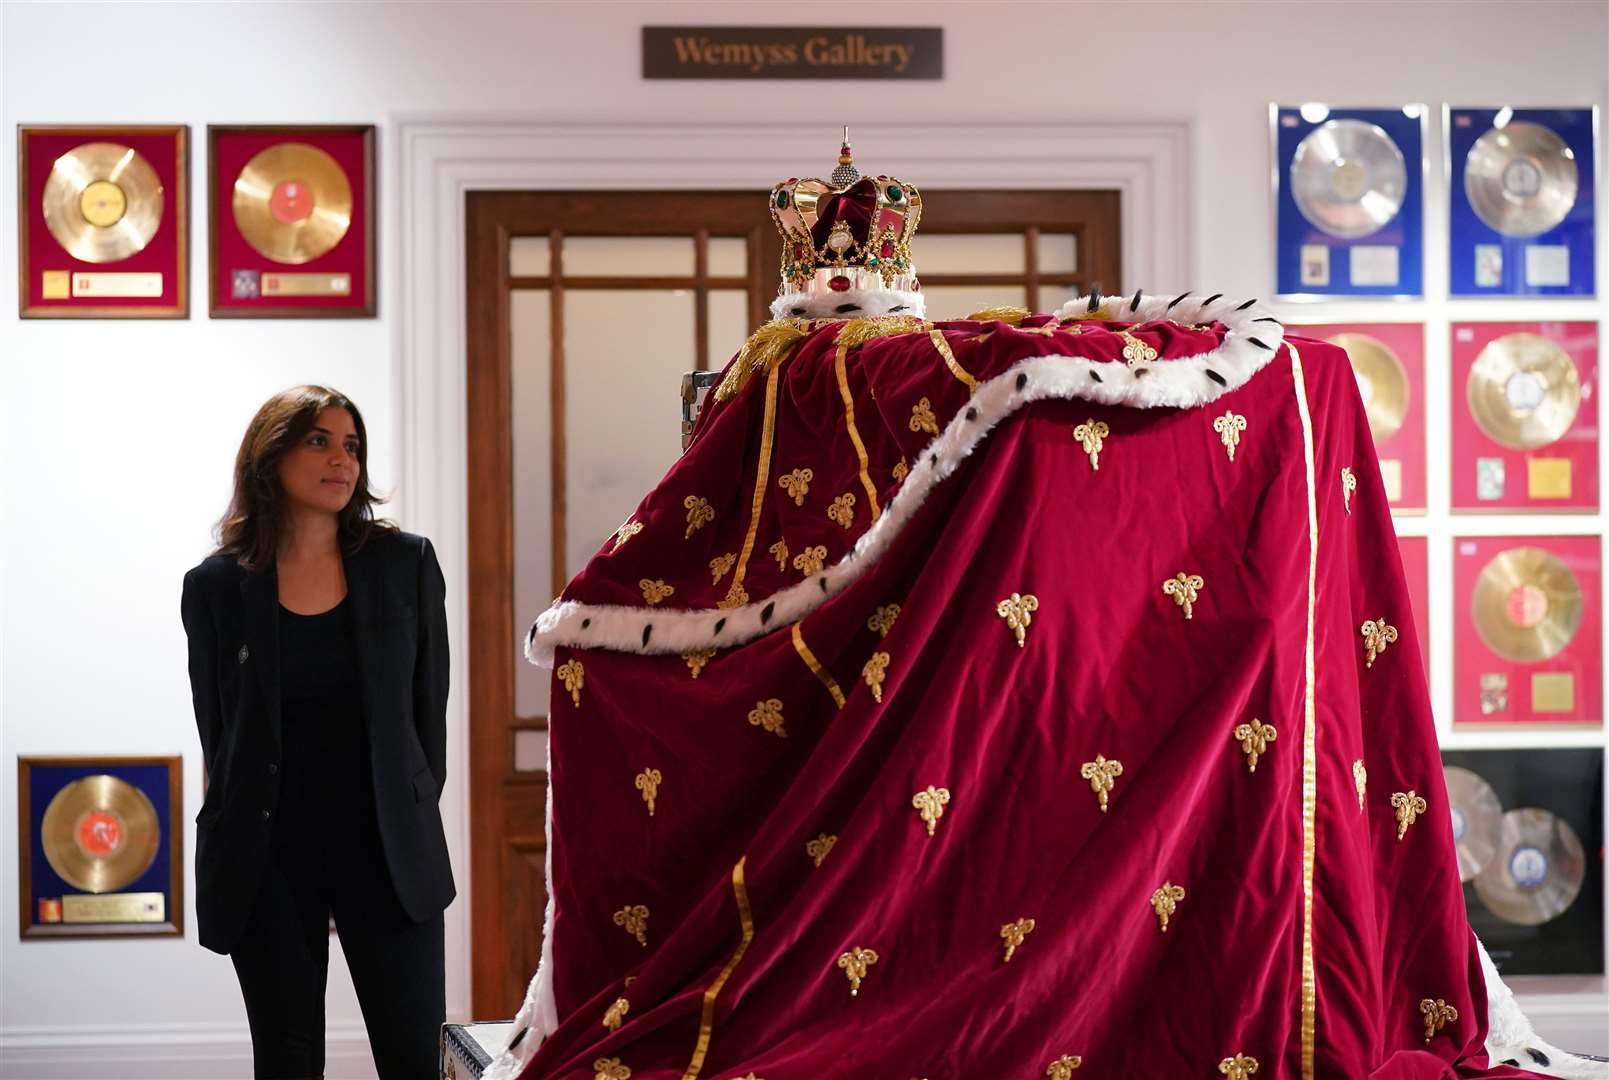 A crown and accompanying cloak, worn by Freddie Mercury during The Magic Tour, has an estimate of £60,000-80,000 (Yui Mok/PA)